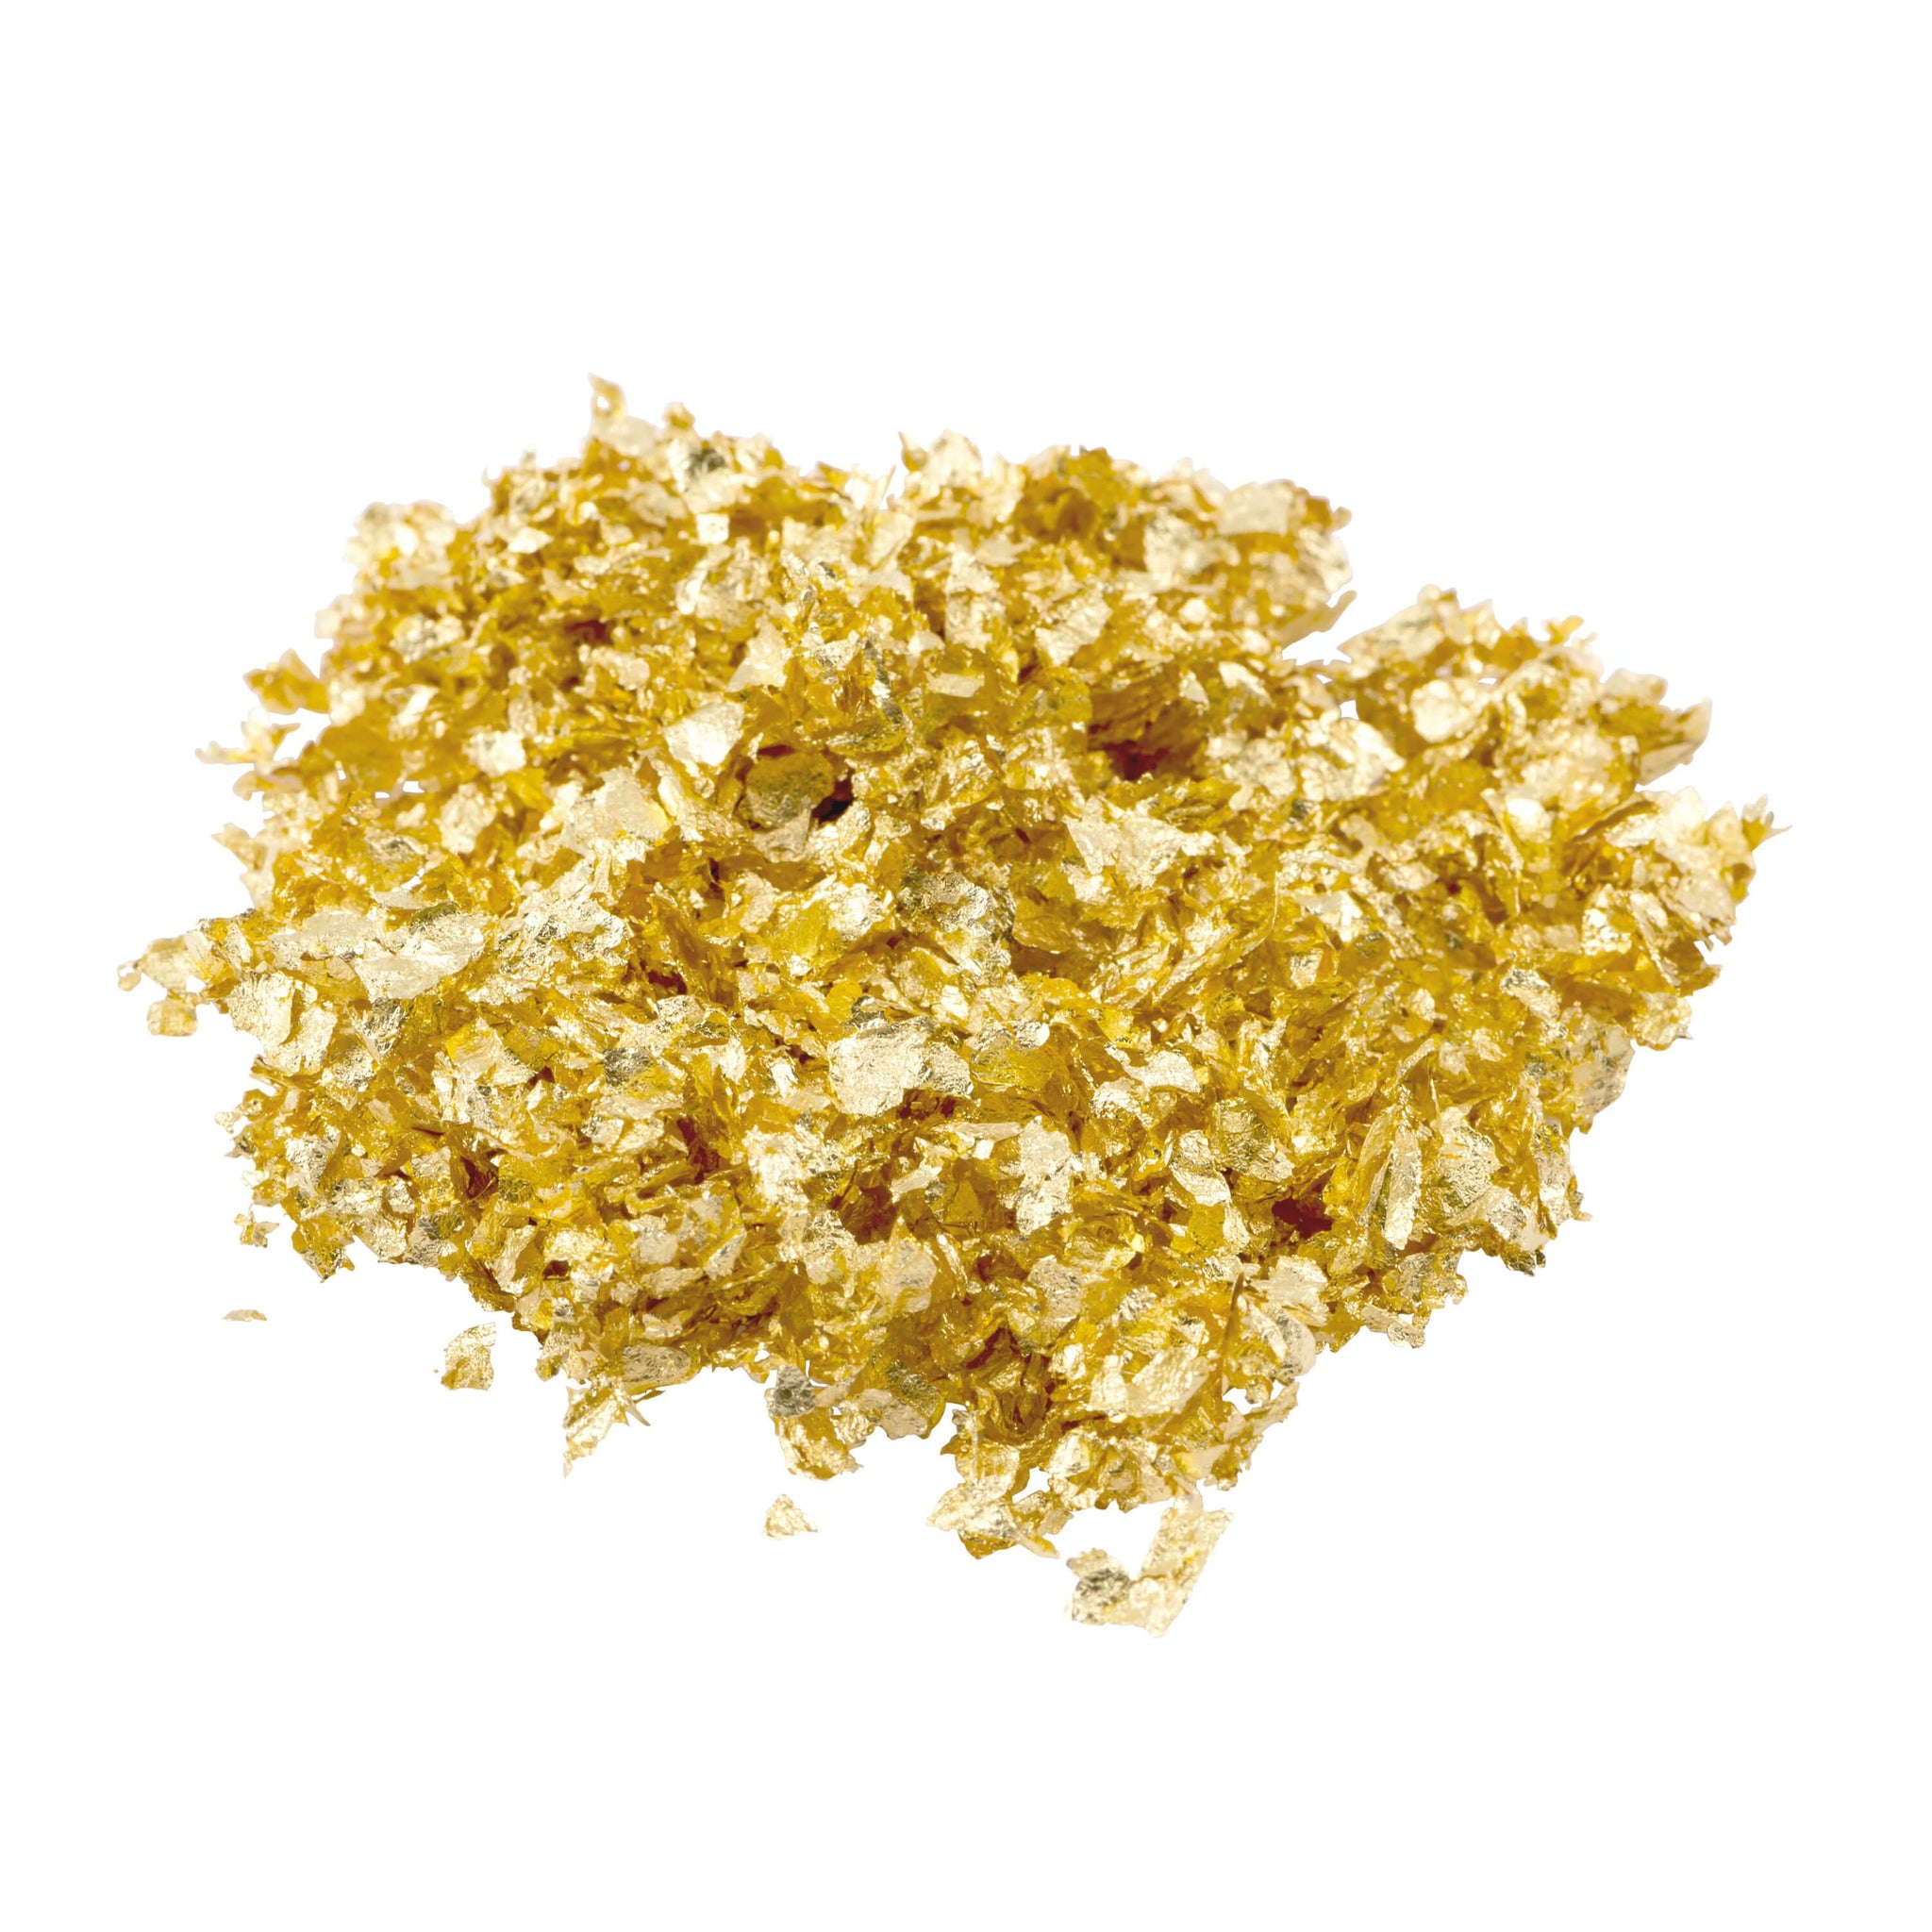 Edible Gold Leaf Flakes | Buy Pure Gold Flakes for Cakes, 100 mg